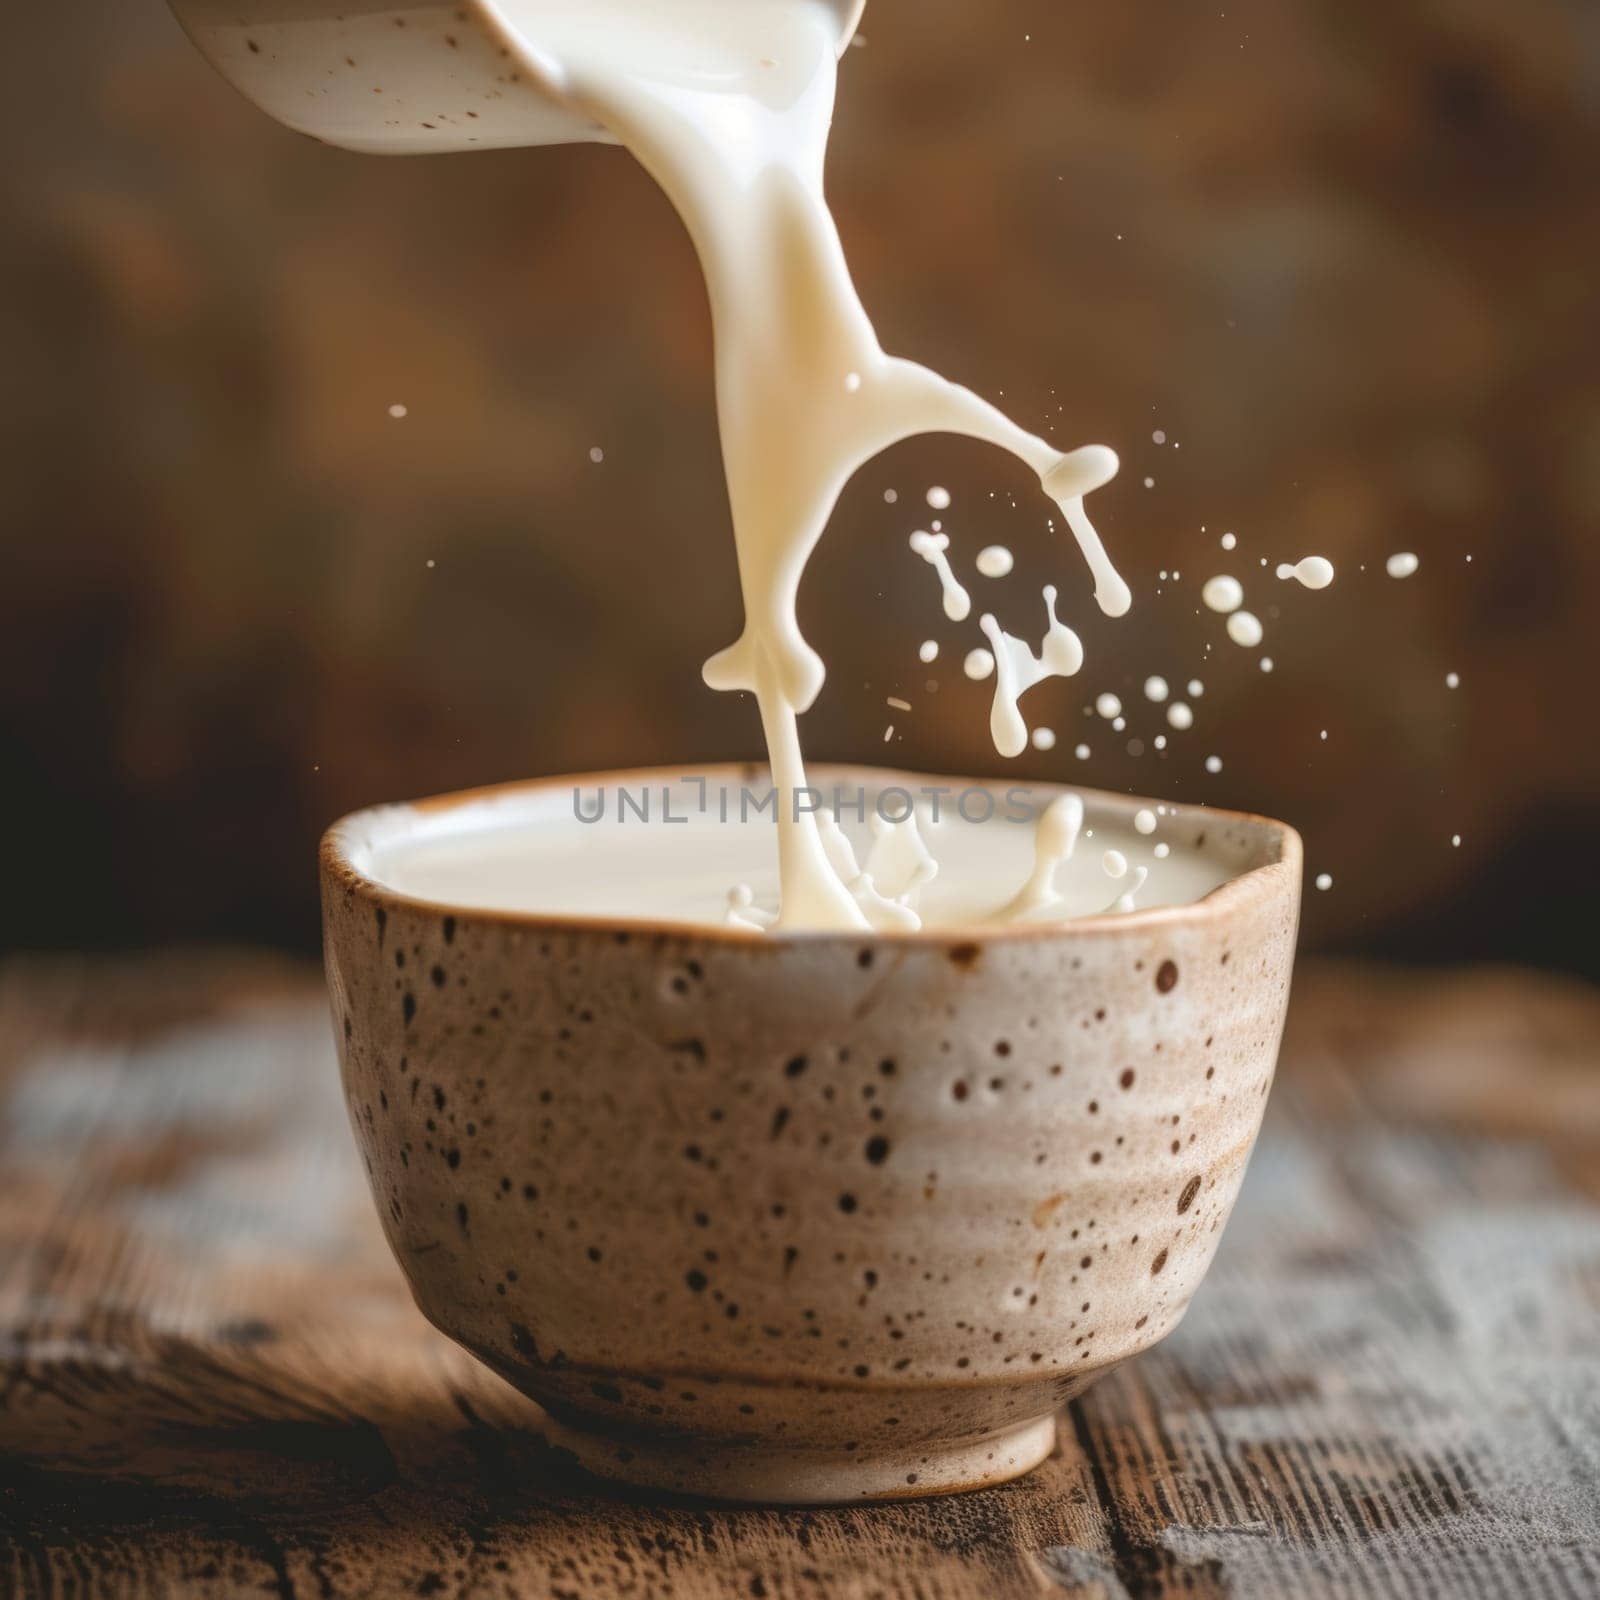 Action shot of milk being poured into a handcrafted ceramic bowl creating a splash